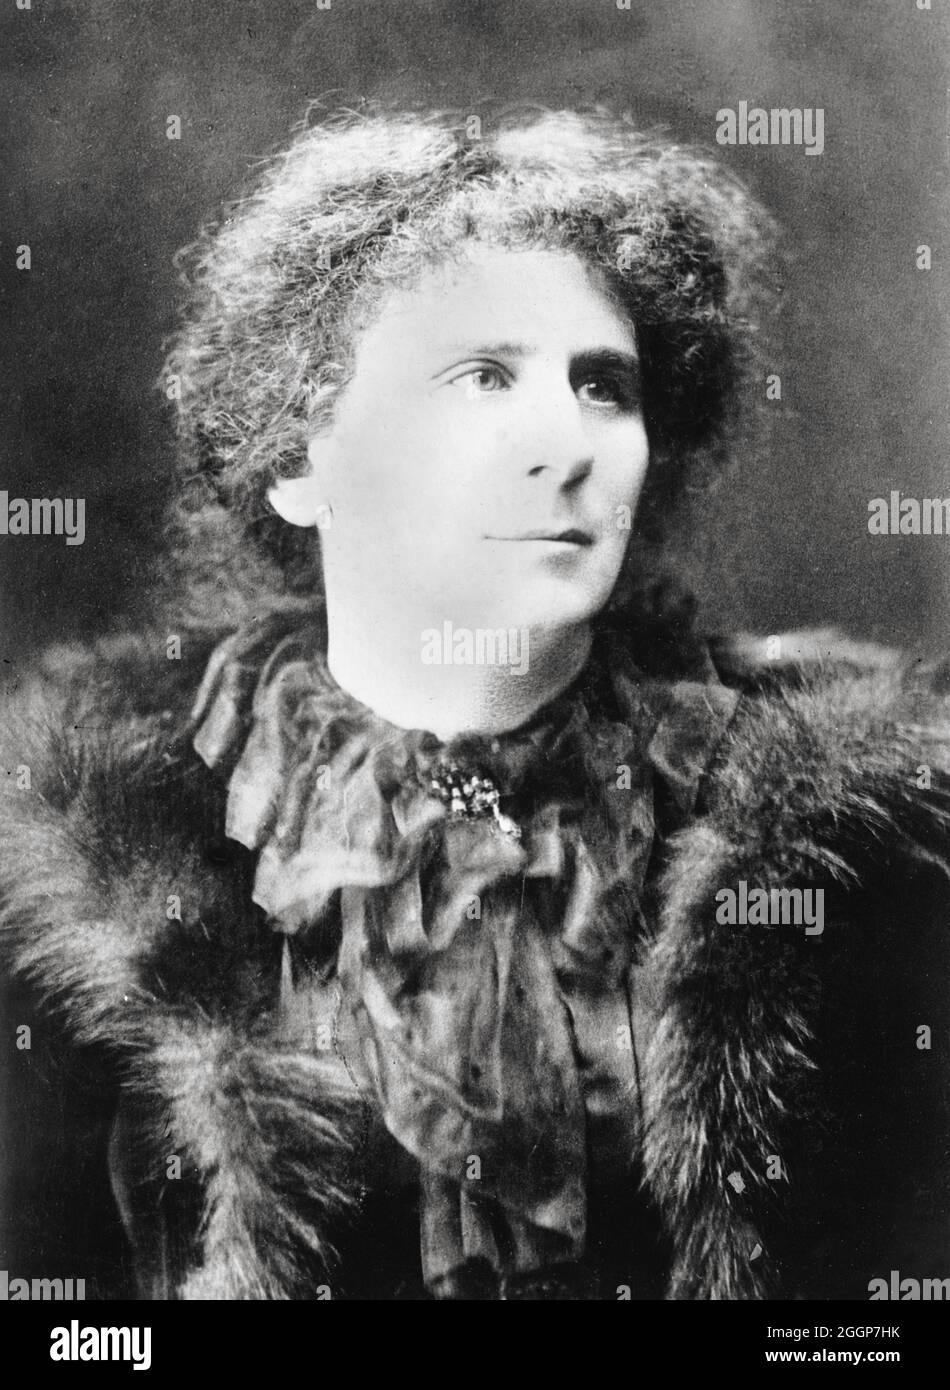 Hertha Ayrton, (1854-1923) was a British mathematician and physicist who was awarded the Hughes Medal by the Royal Society for her work on electric arcs and ripple marks in sand and water. Stock Photo